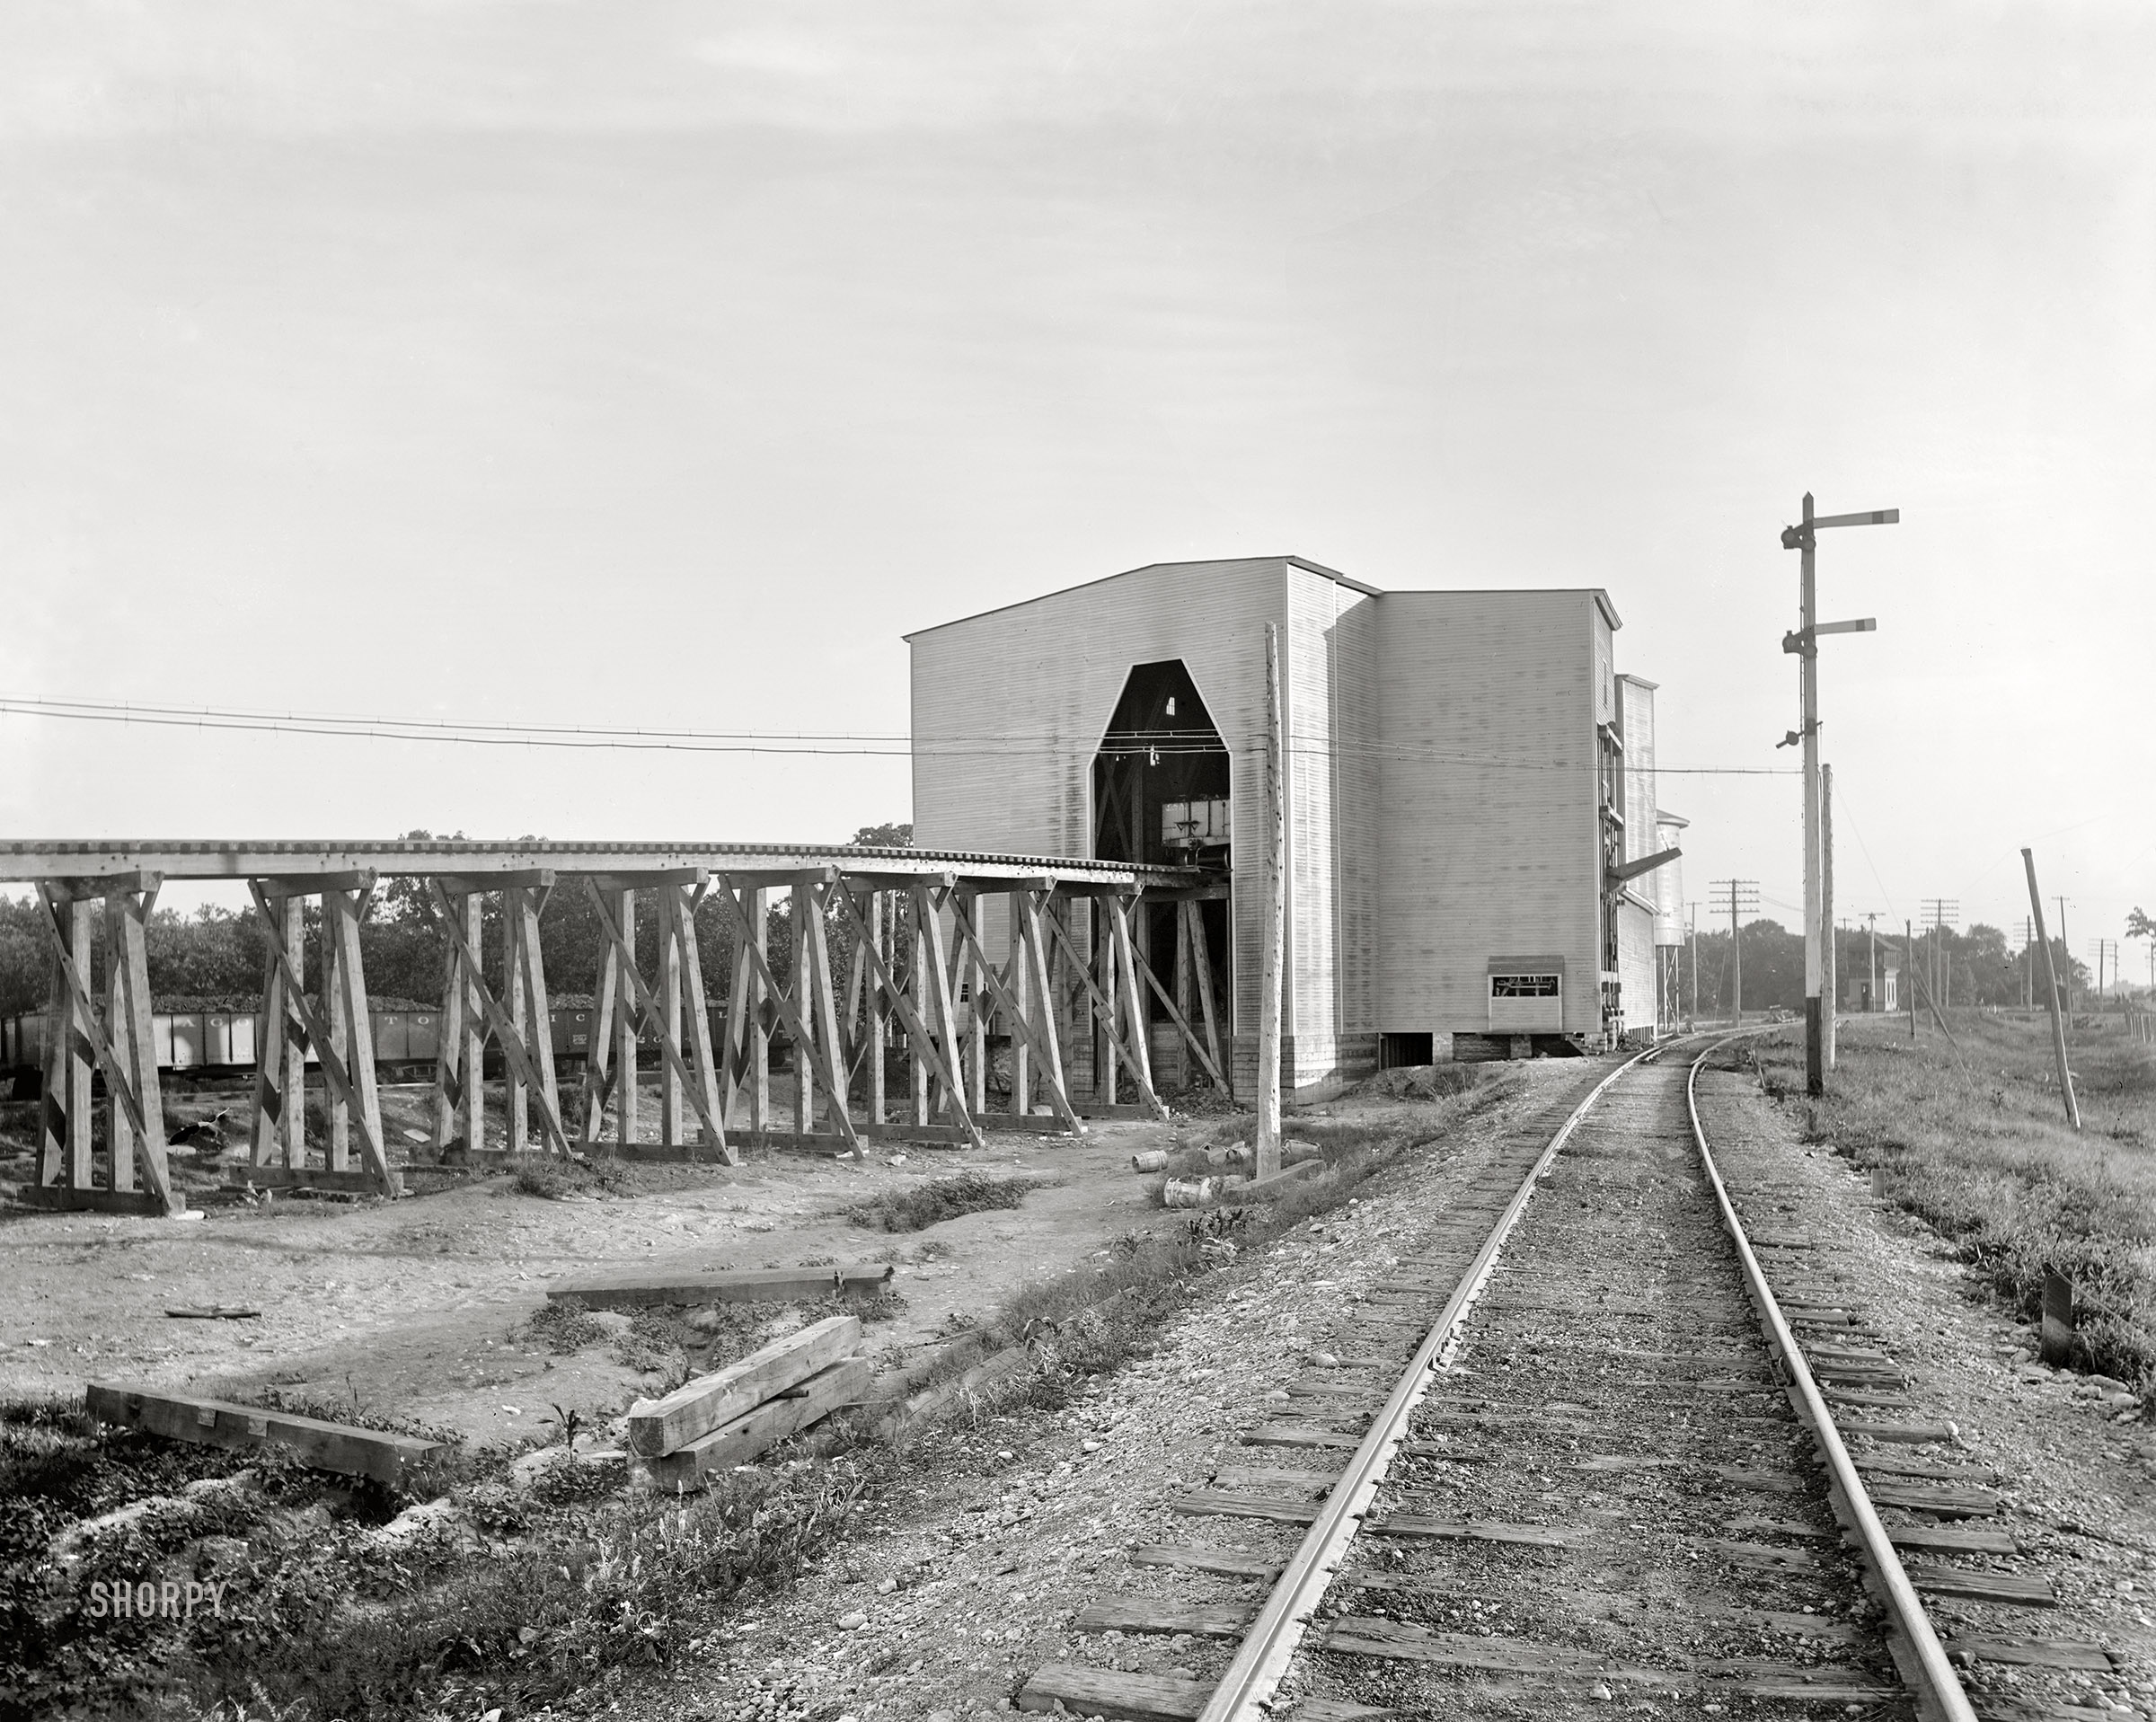 Circa 1901. "Coaling station and water tank, C. & A. R.R., Mazonia, Illinois." 8x10 inch dry plate glass negative, Detroit Photographic Company. View full size.